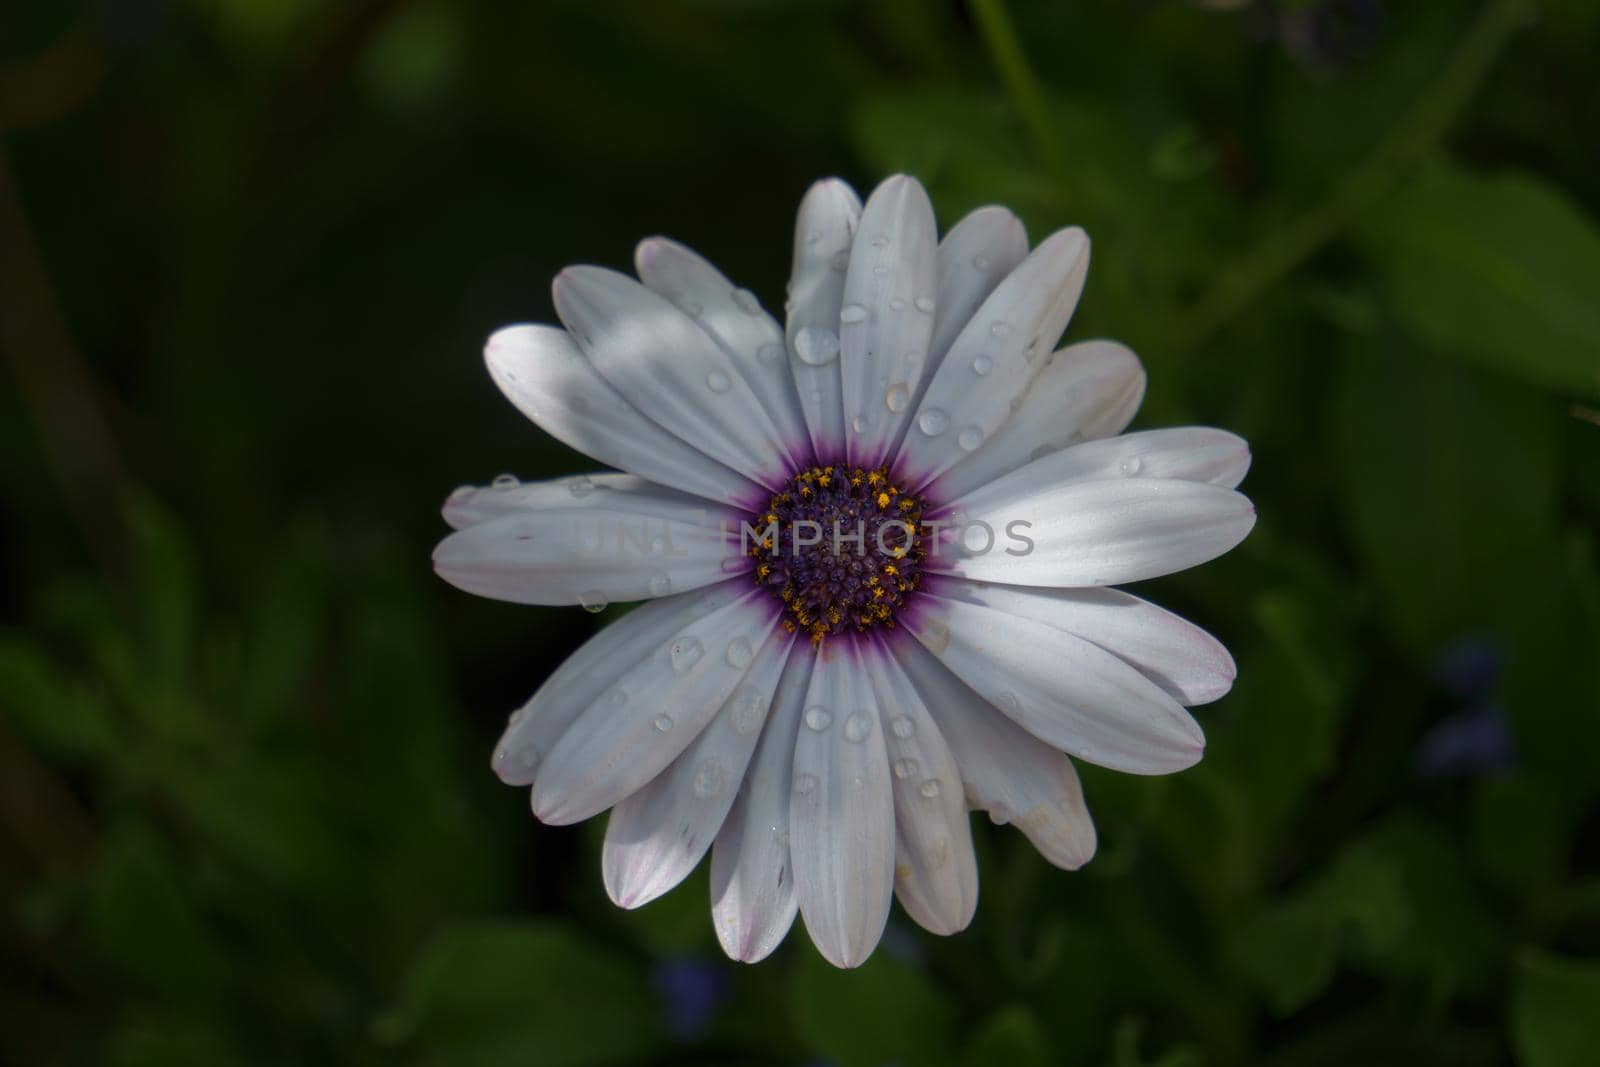 close-up of a white daisy with dewdrops illuminated by the sun with a dark background out of focus.